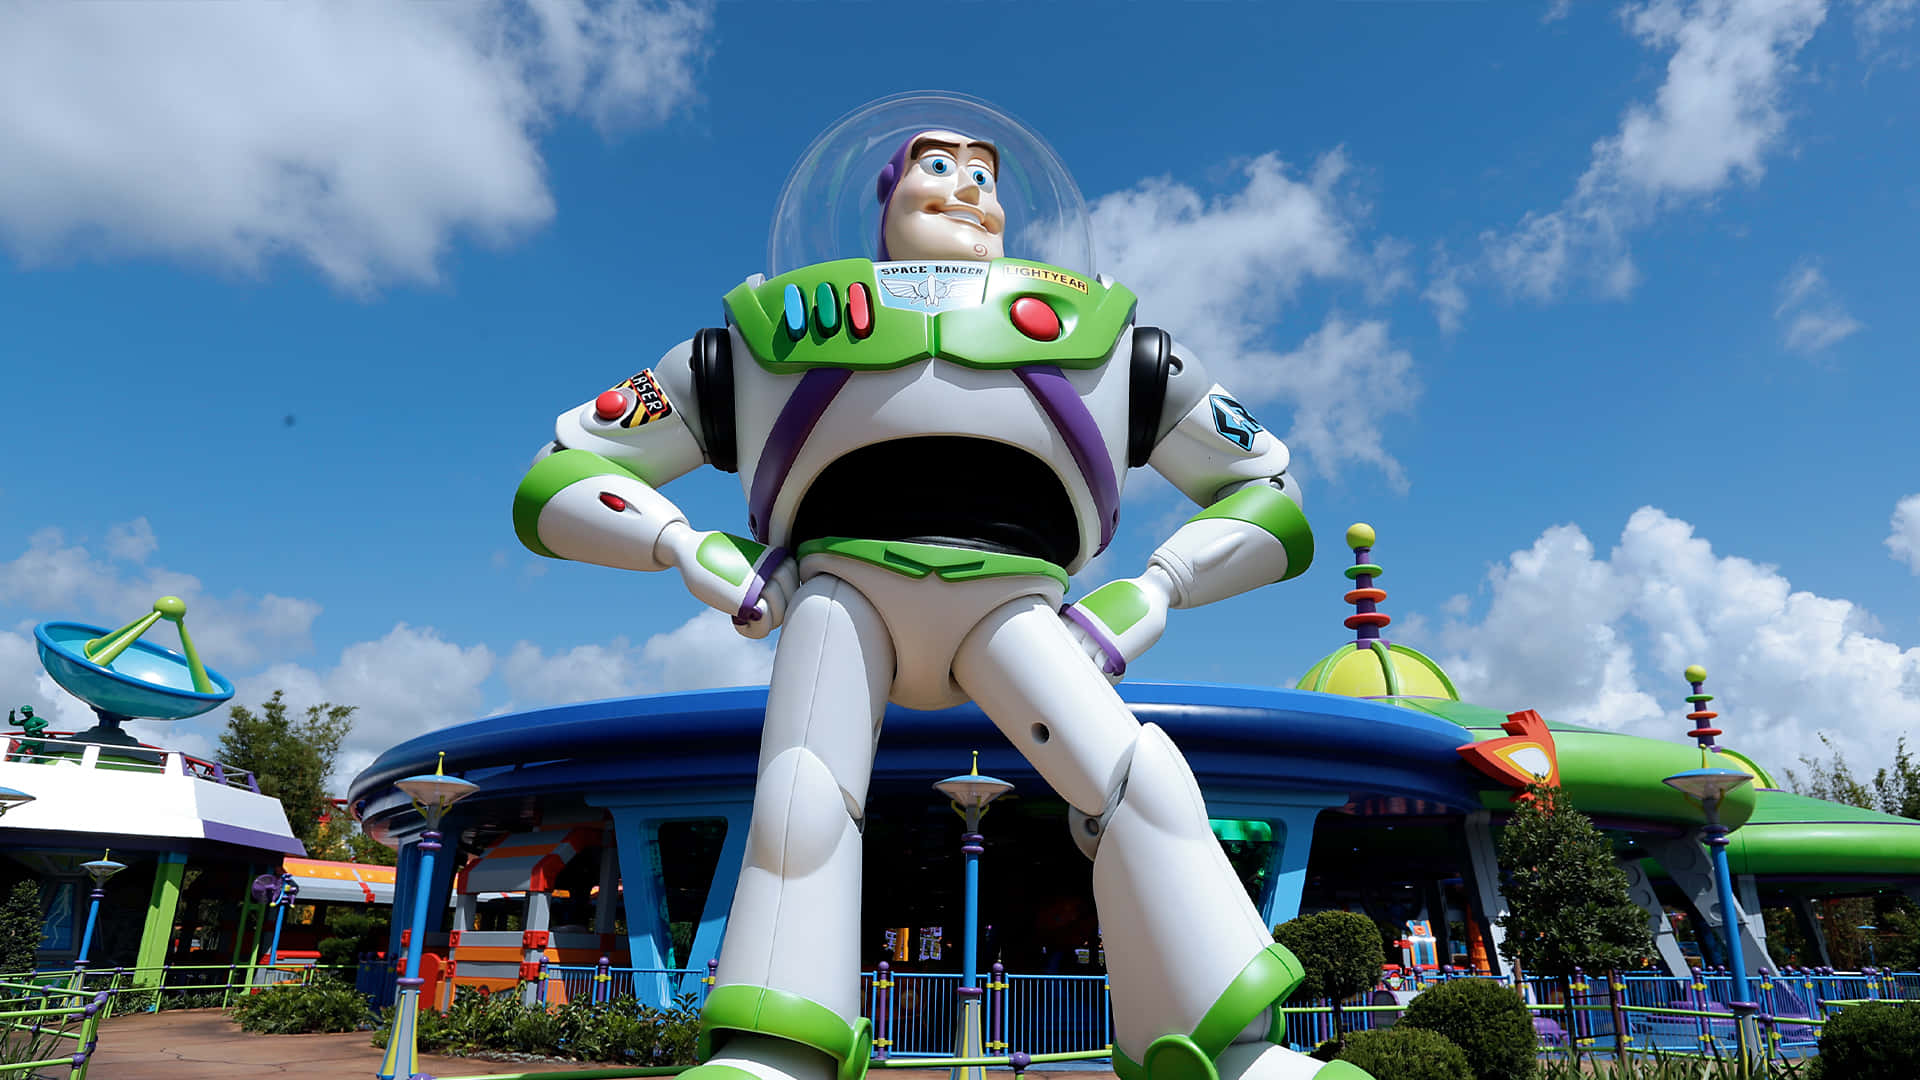 "To infinity and beyond!"